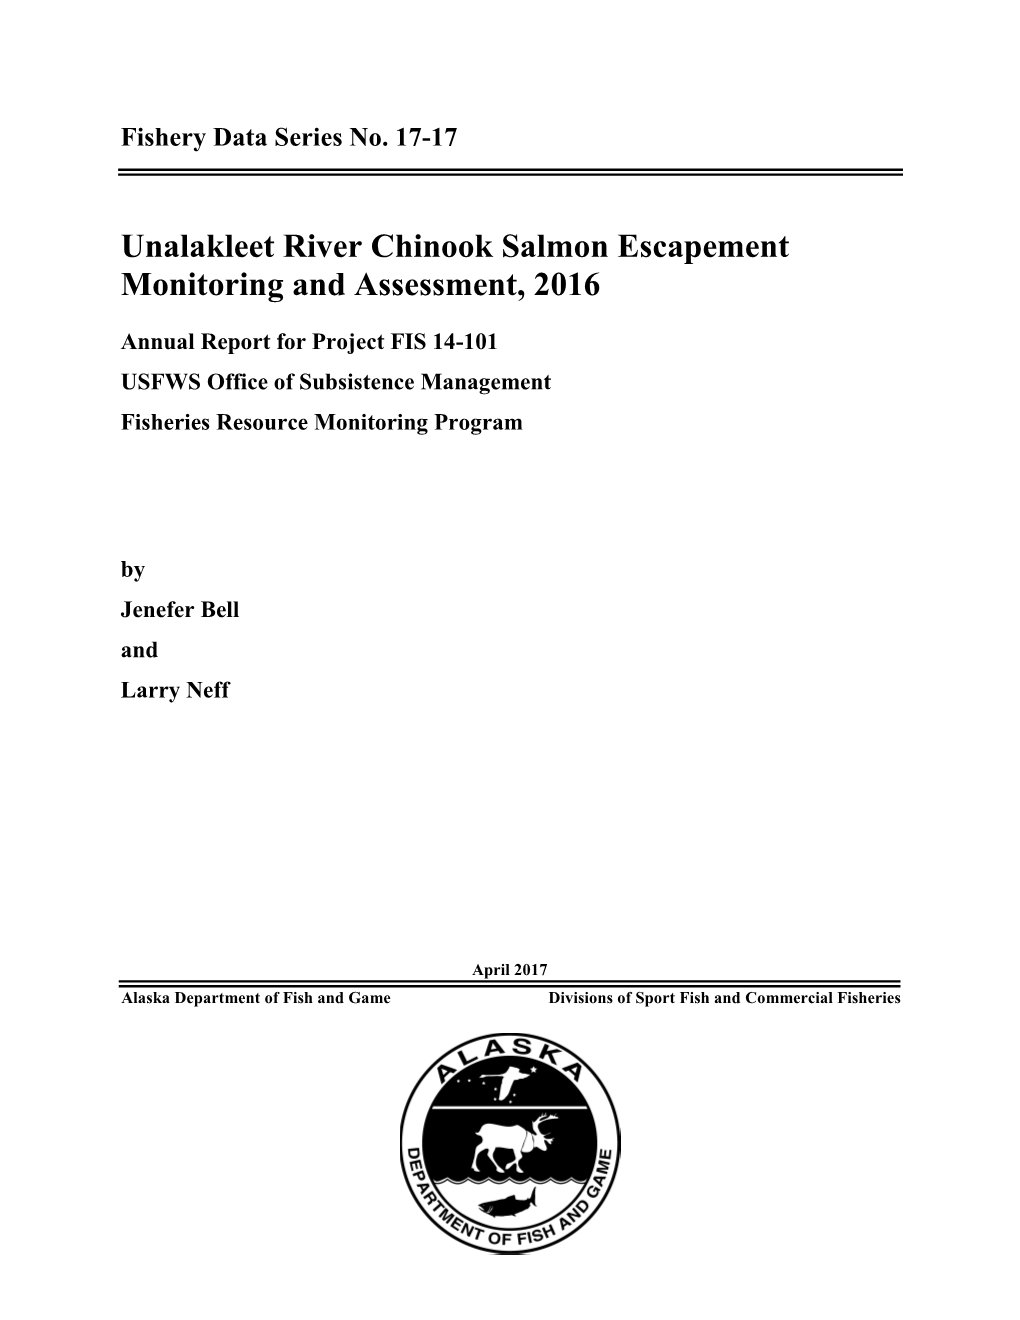 Unalakleet River Chinook Salmon Escapement Monitoring and Assessment, 2016